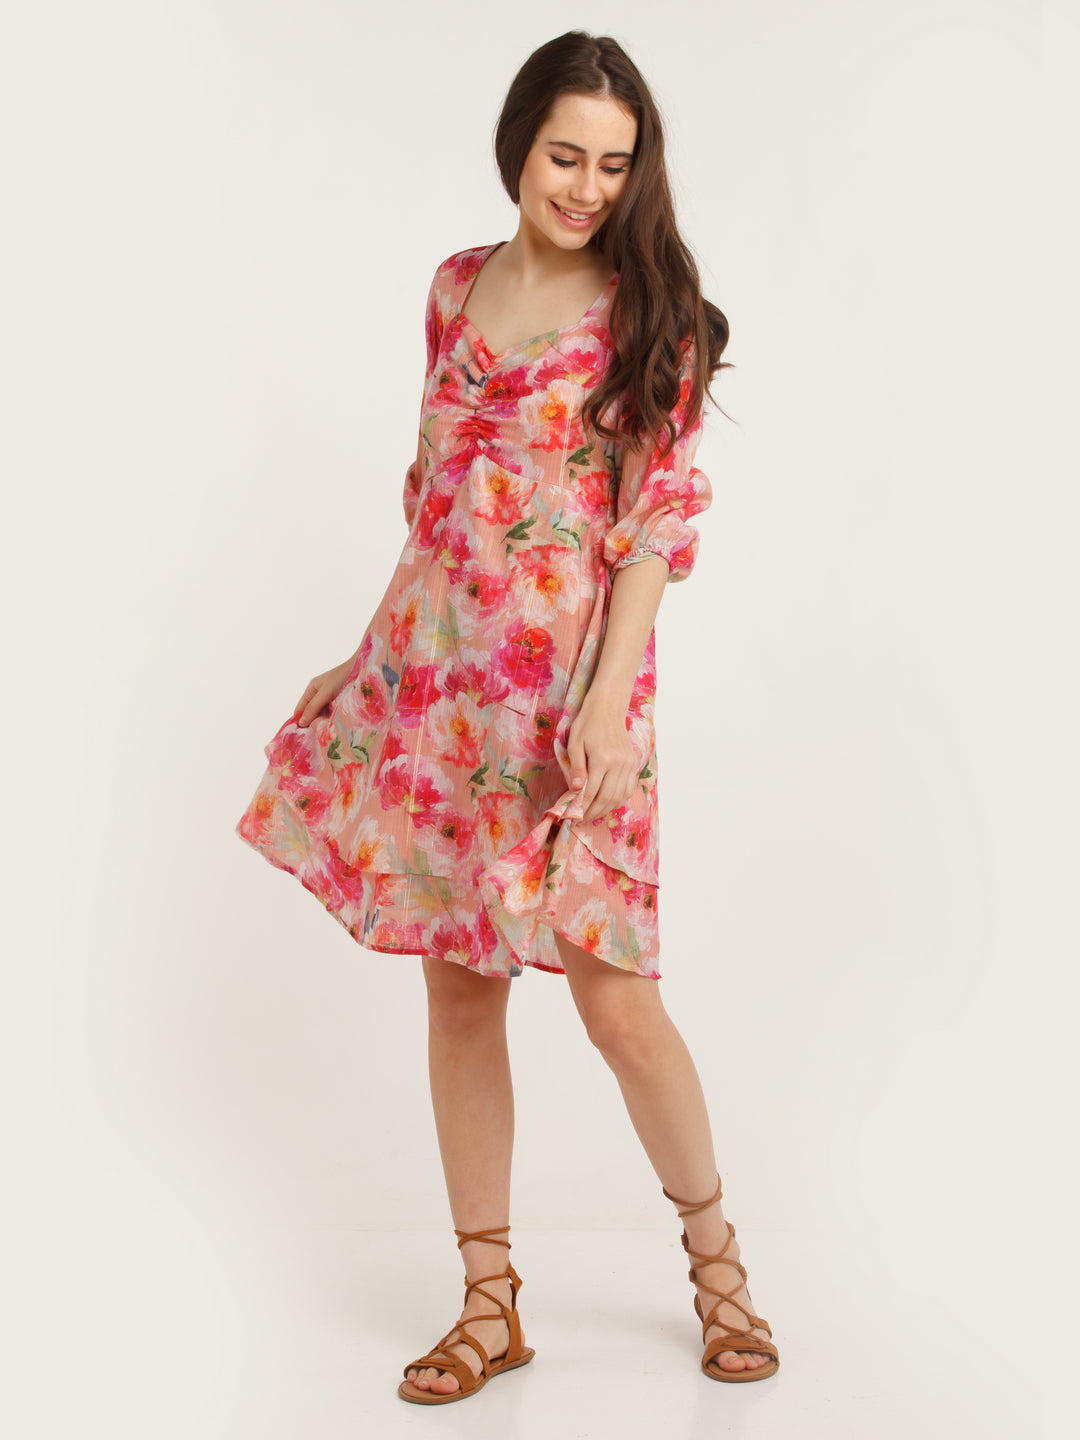 Pink Printed Layered Short Dress For Women